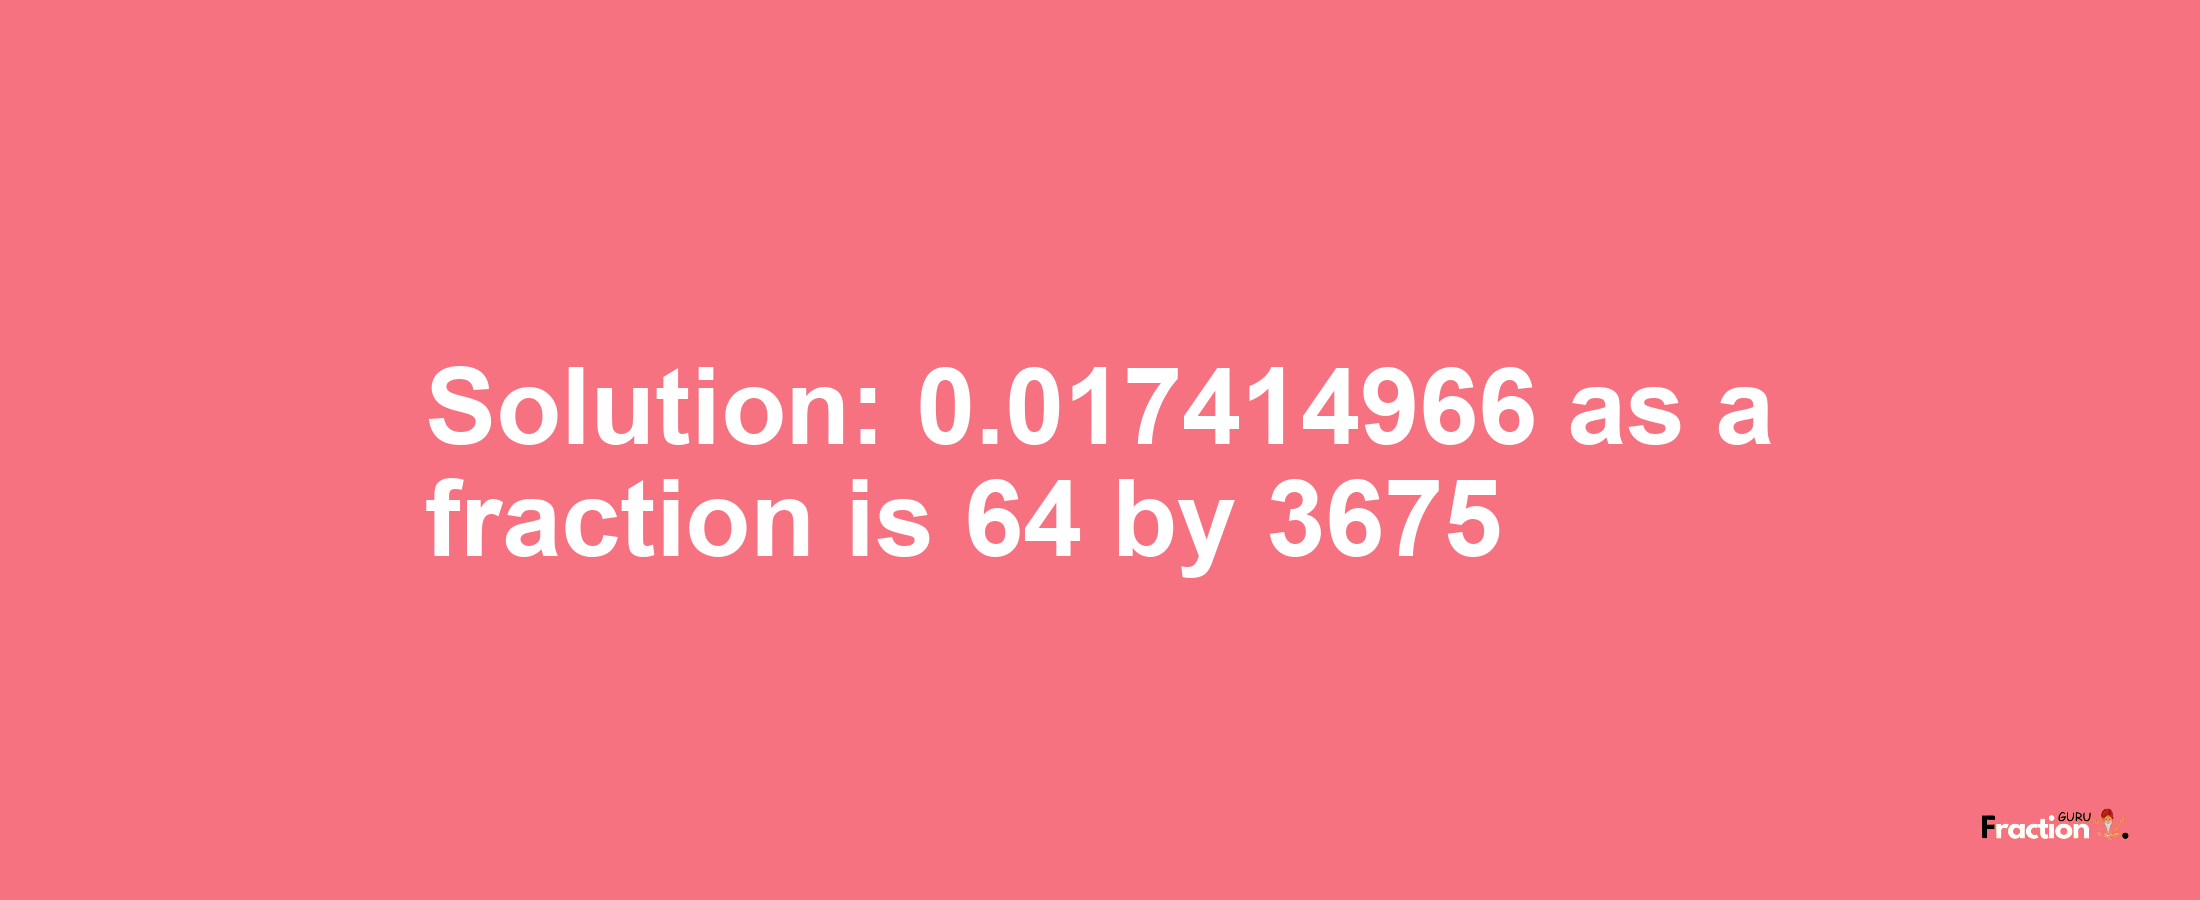 Solution:0.017414966 as a fraction is 64/3675